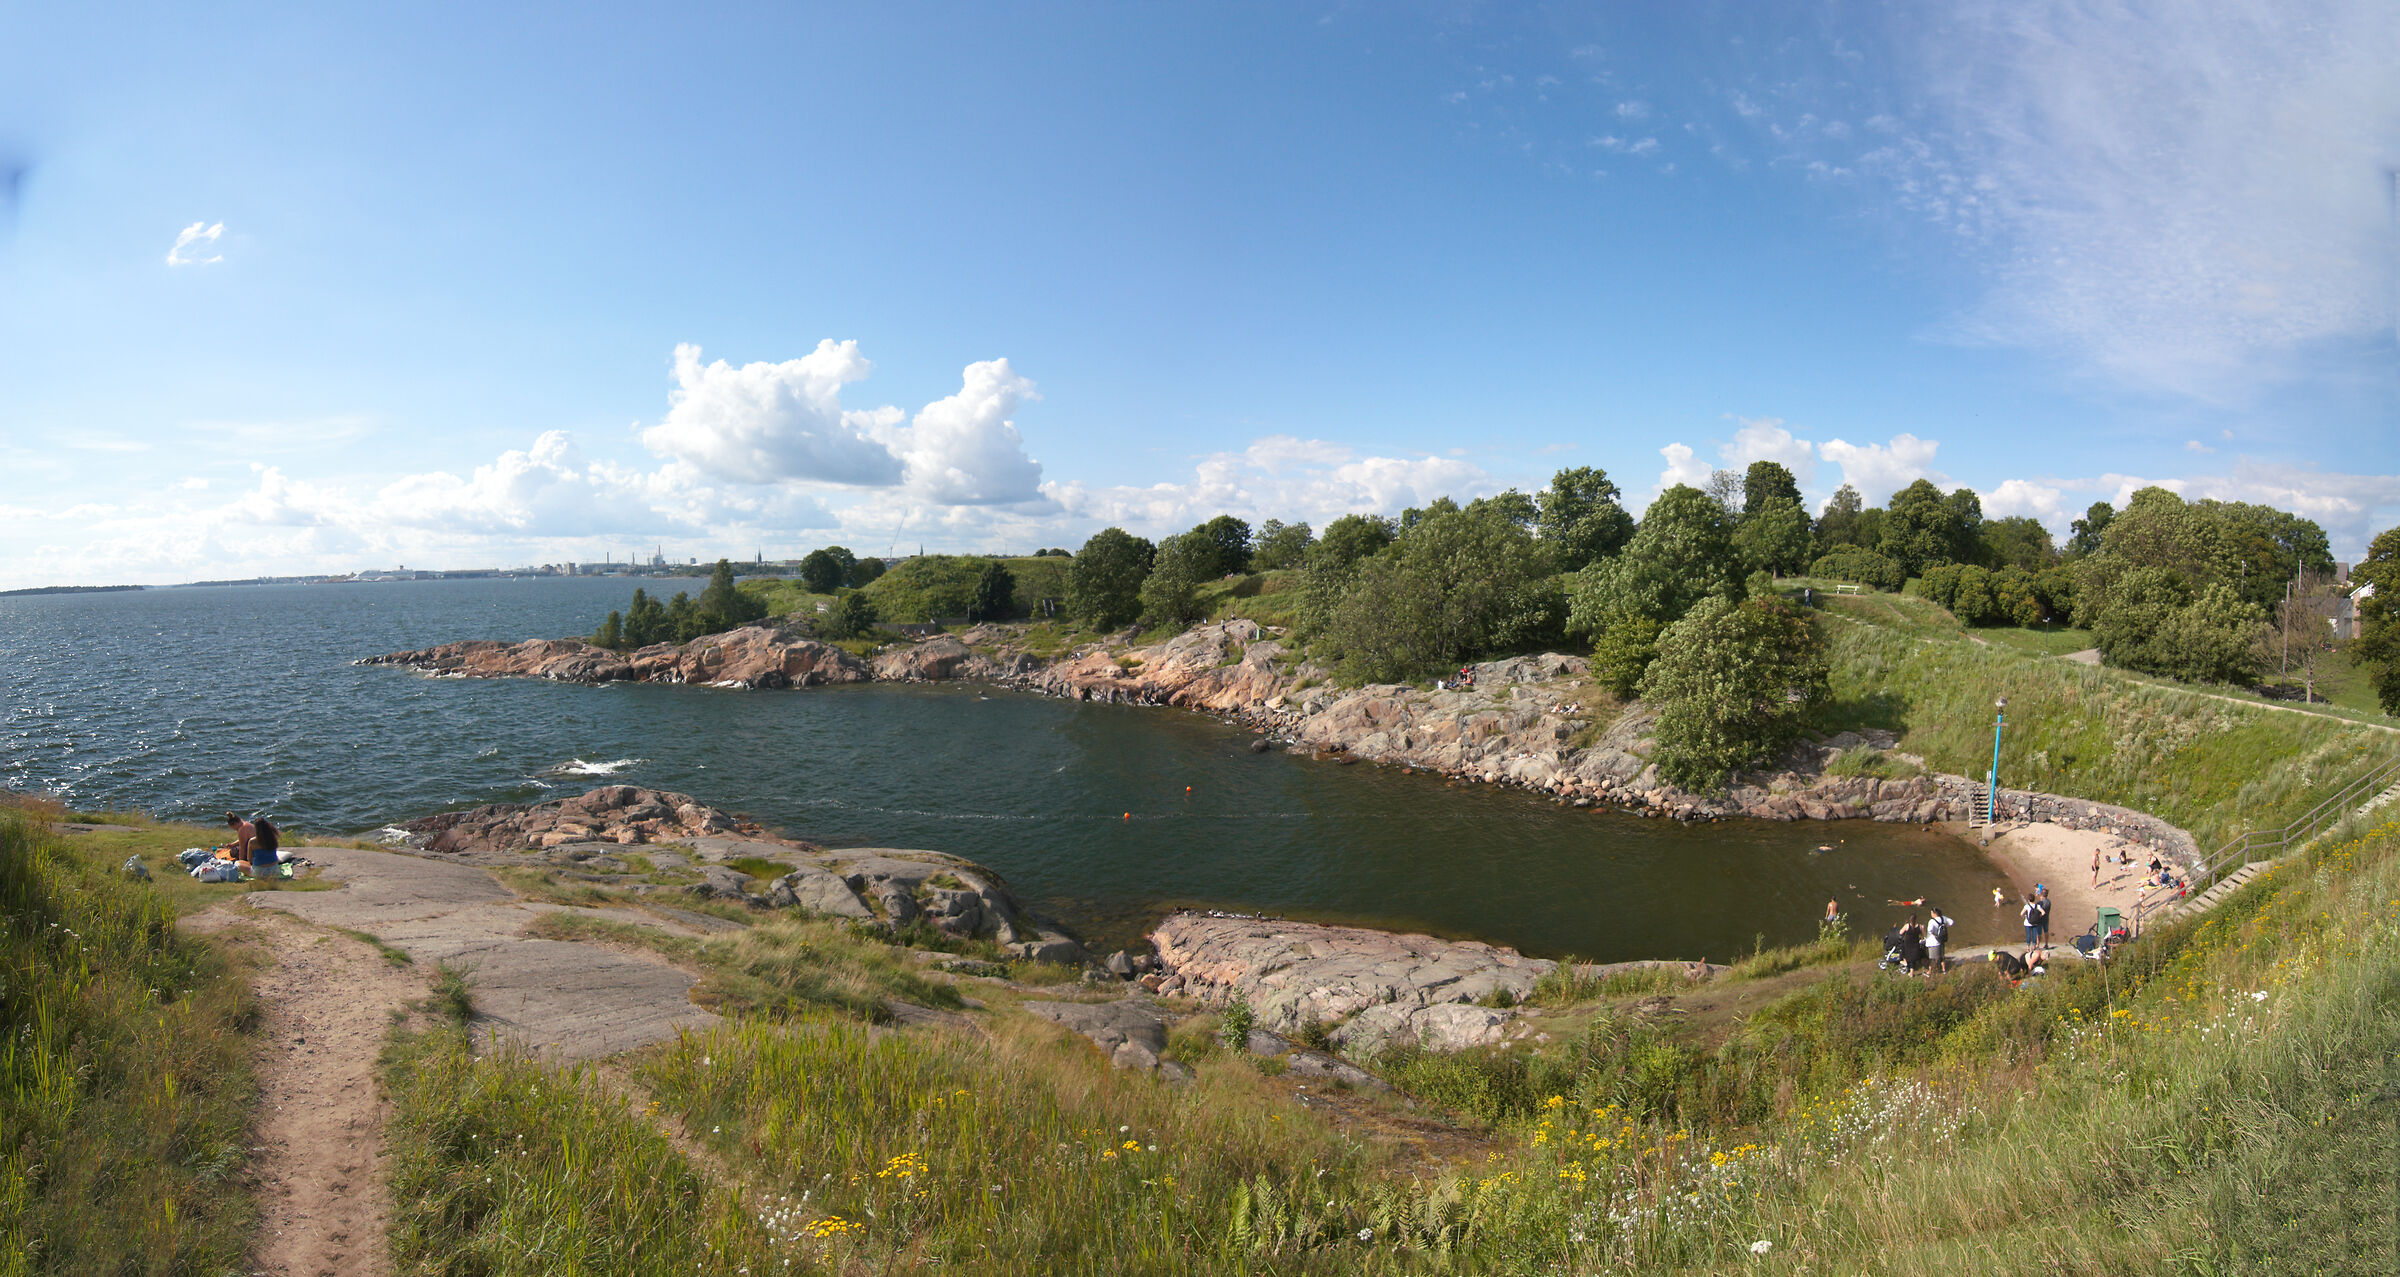 Overview 1 - SUOMENLINNA - A fortress on the water...